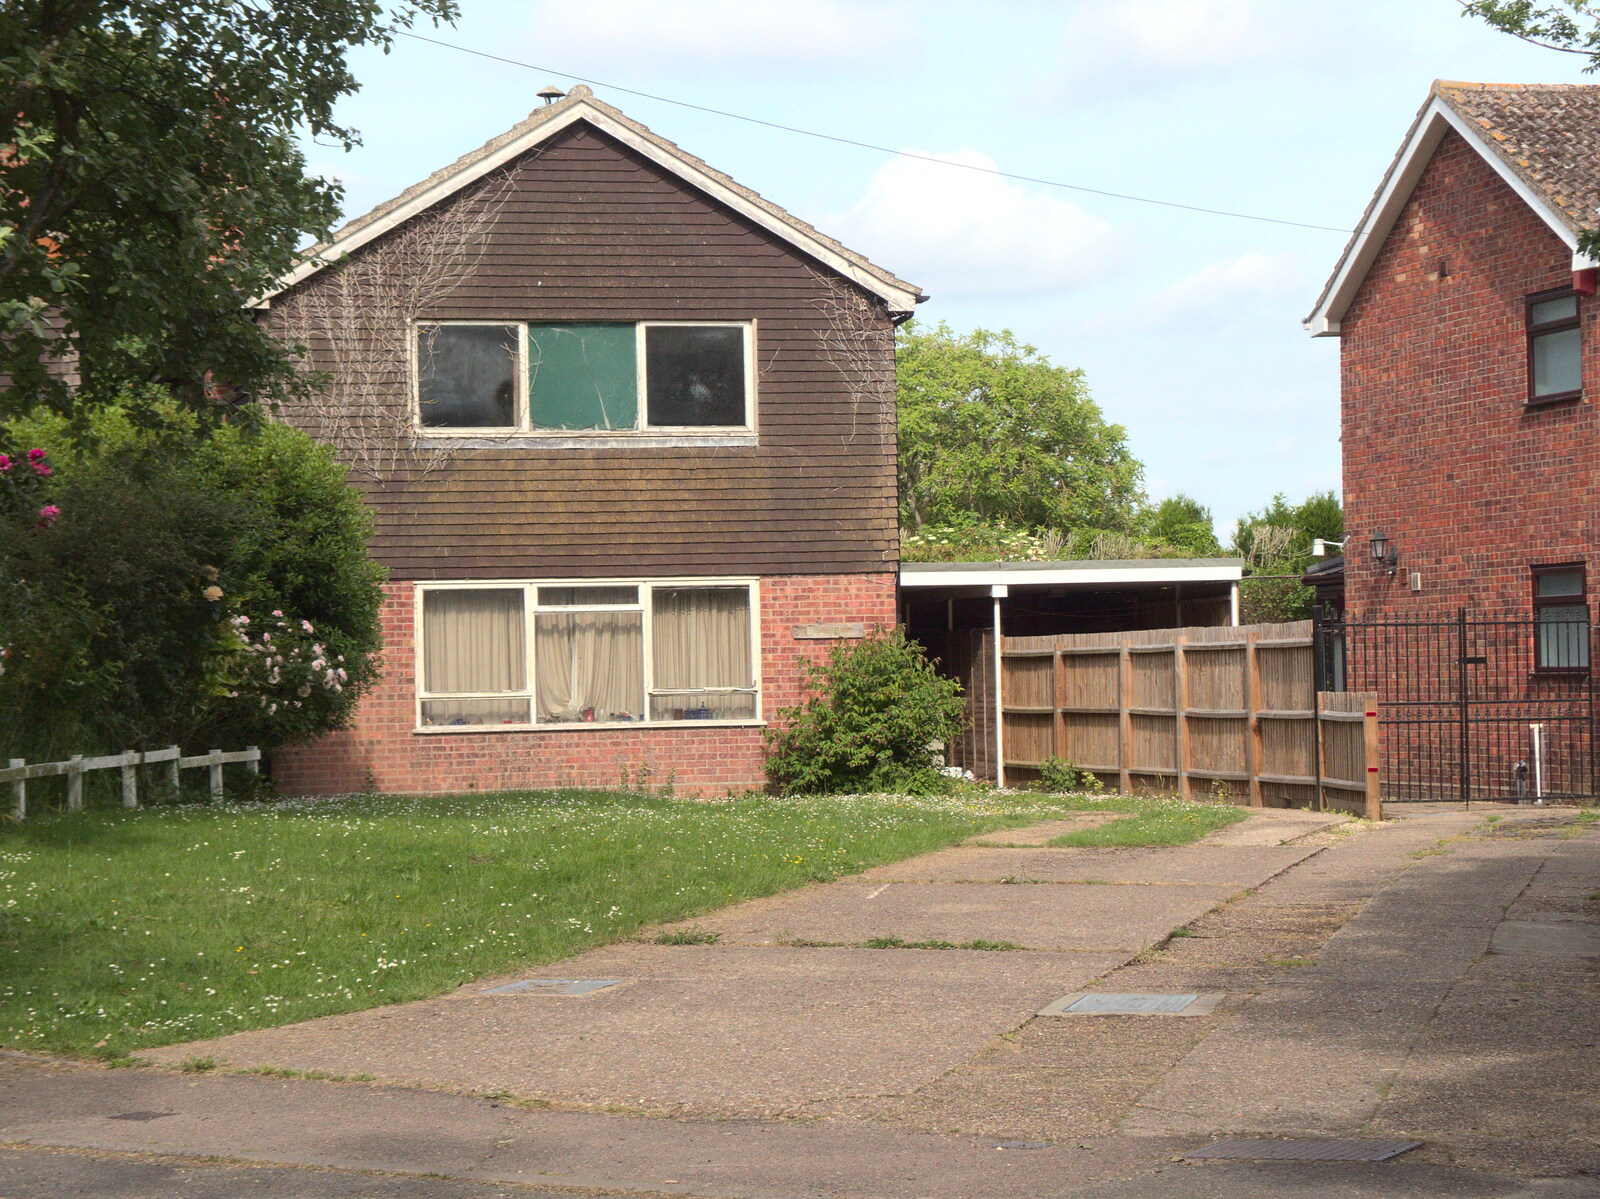 A derelict-looking house in Gislingham from A BSCC Ride to Pulham Market, Norfolk - 17th June 2021